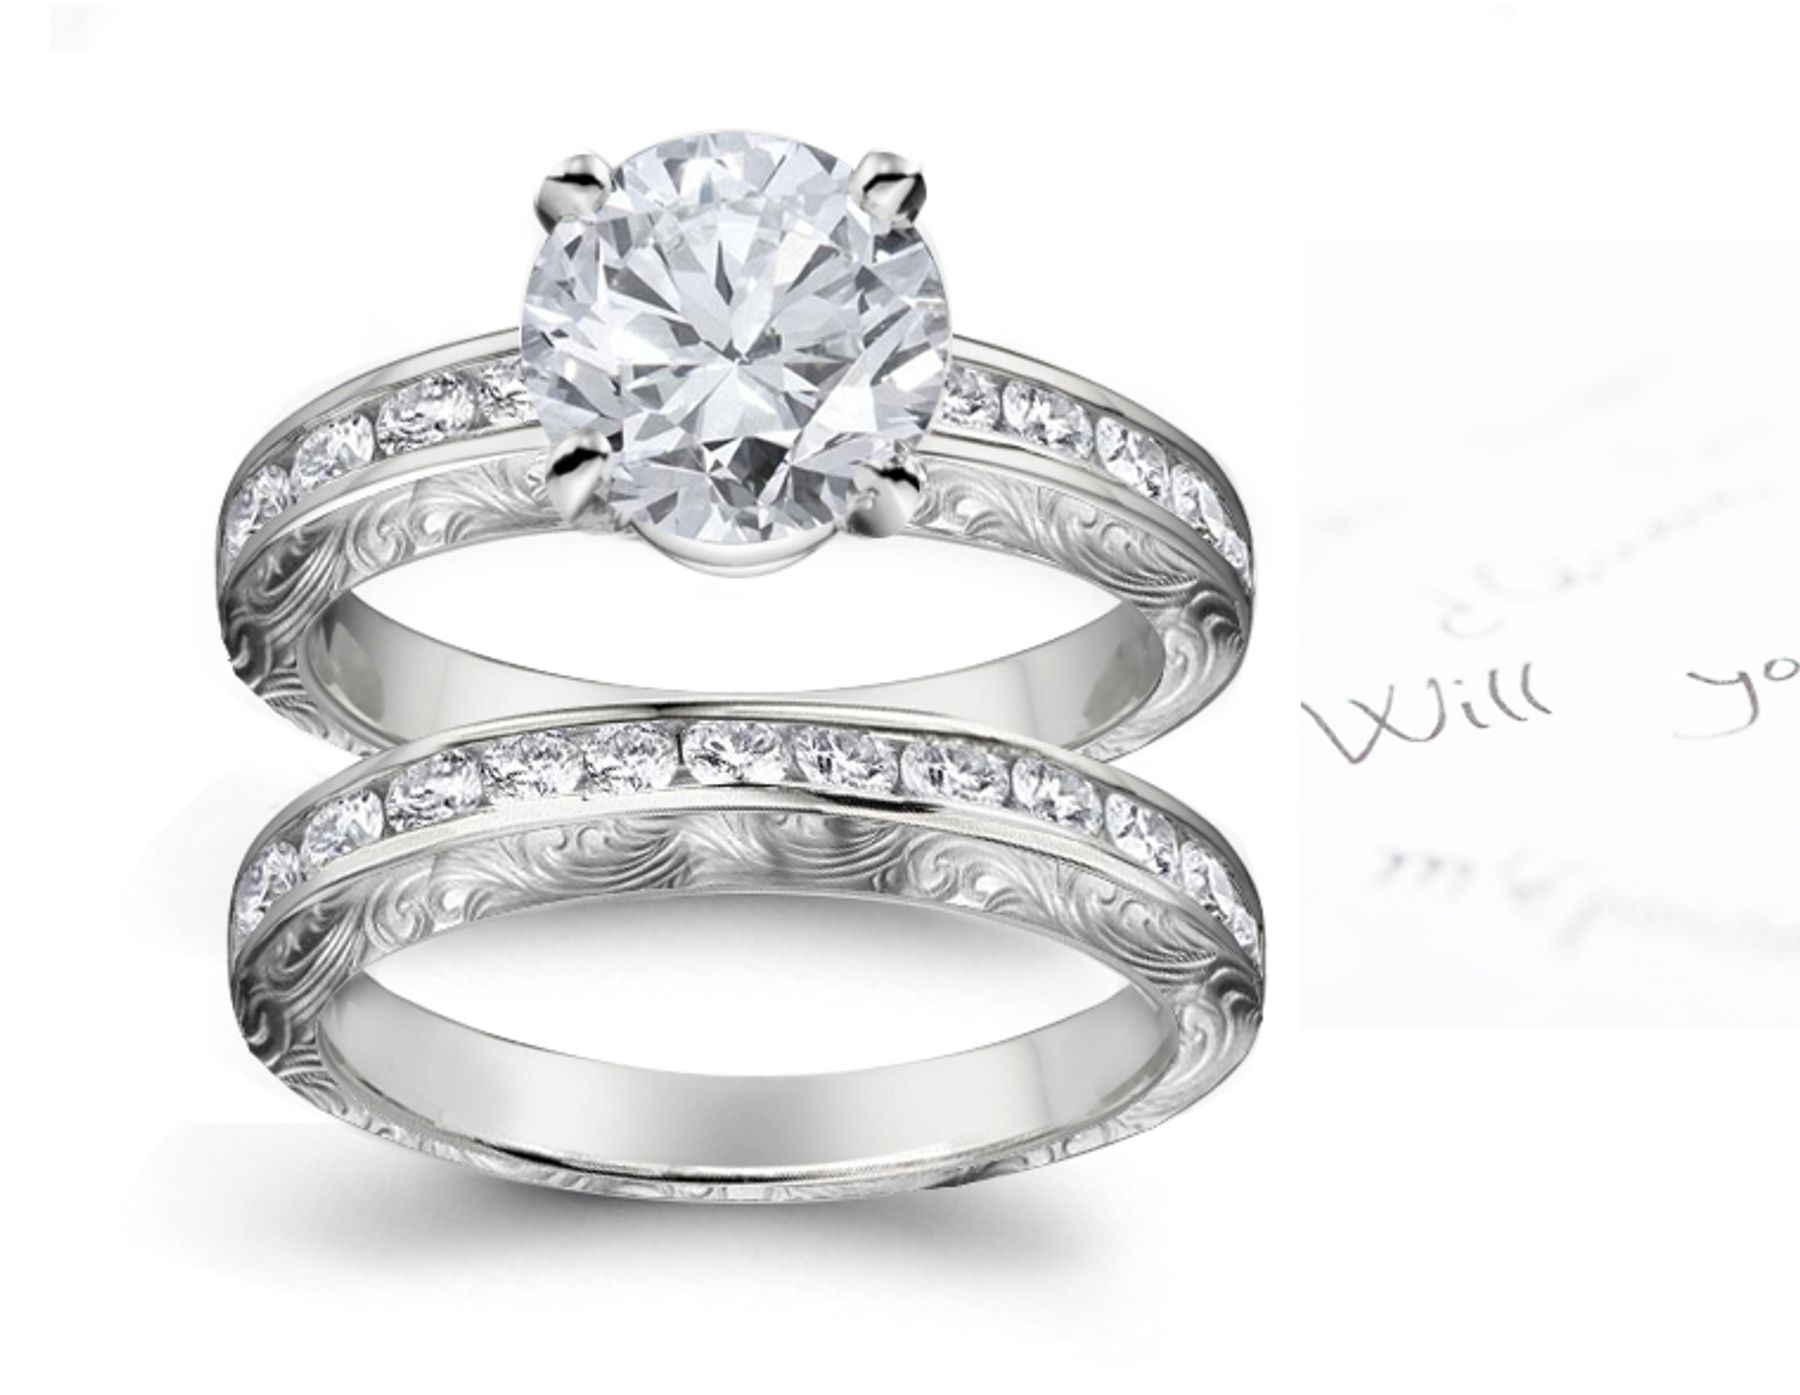 Antique Style Diamond Engagement & Wedding Floral Scrolls & Motifs Ring & Band in Platinum